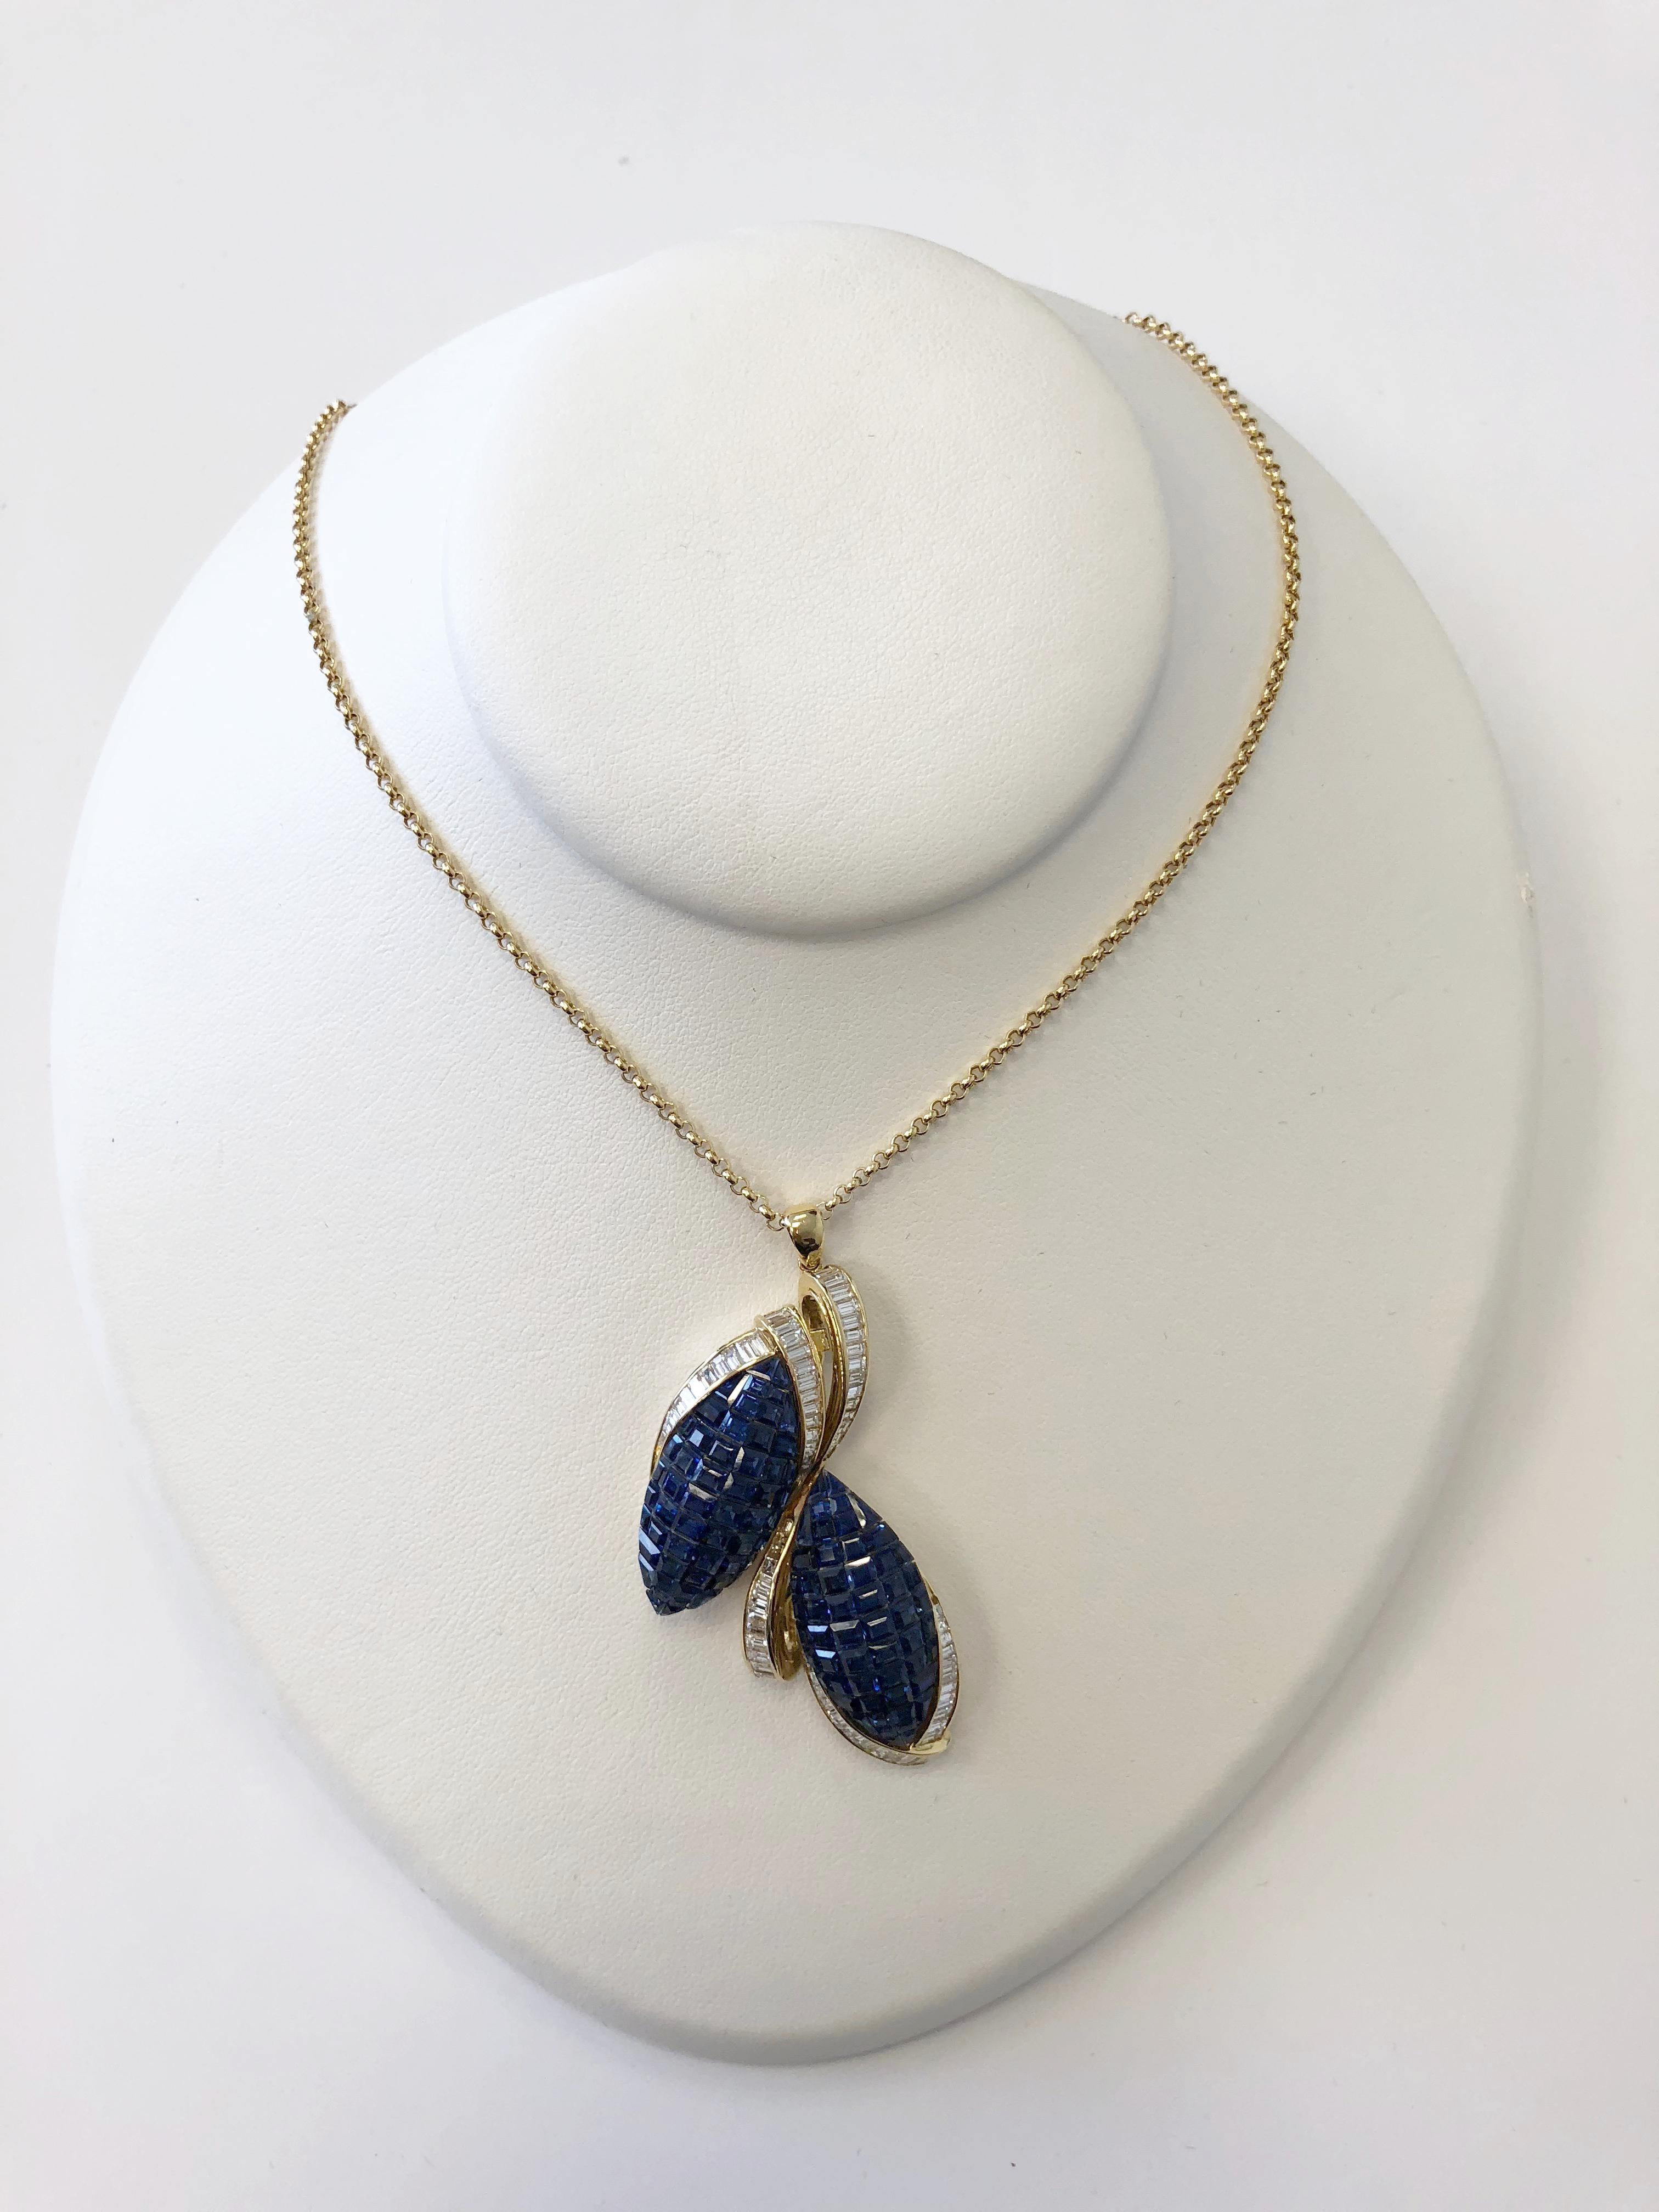 Beautiful blue sapphire squares channel set into a leaf design with diamonds in 18k yellow gold. Blue sapphires are 14.24 carats with a deep blue color and good crystal. White diamonds are 2.86 carats white and clean. Total length of necklace is